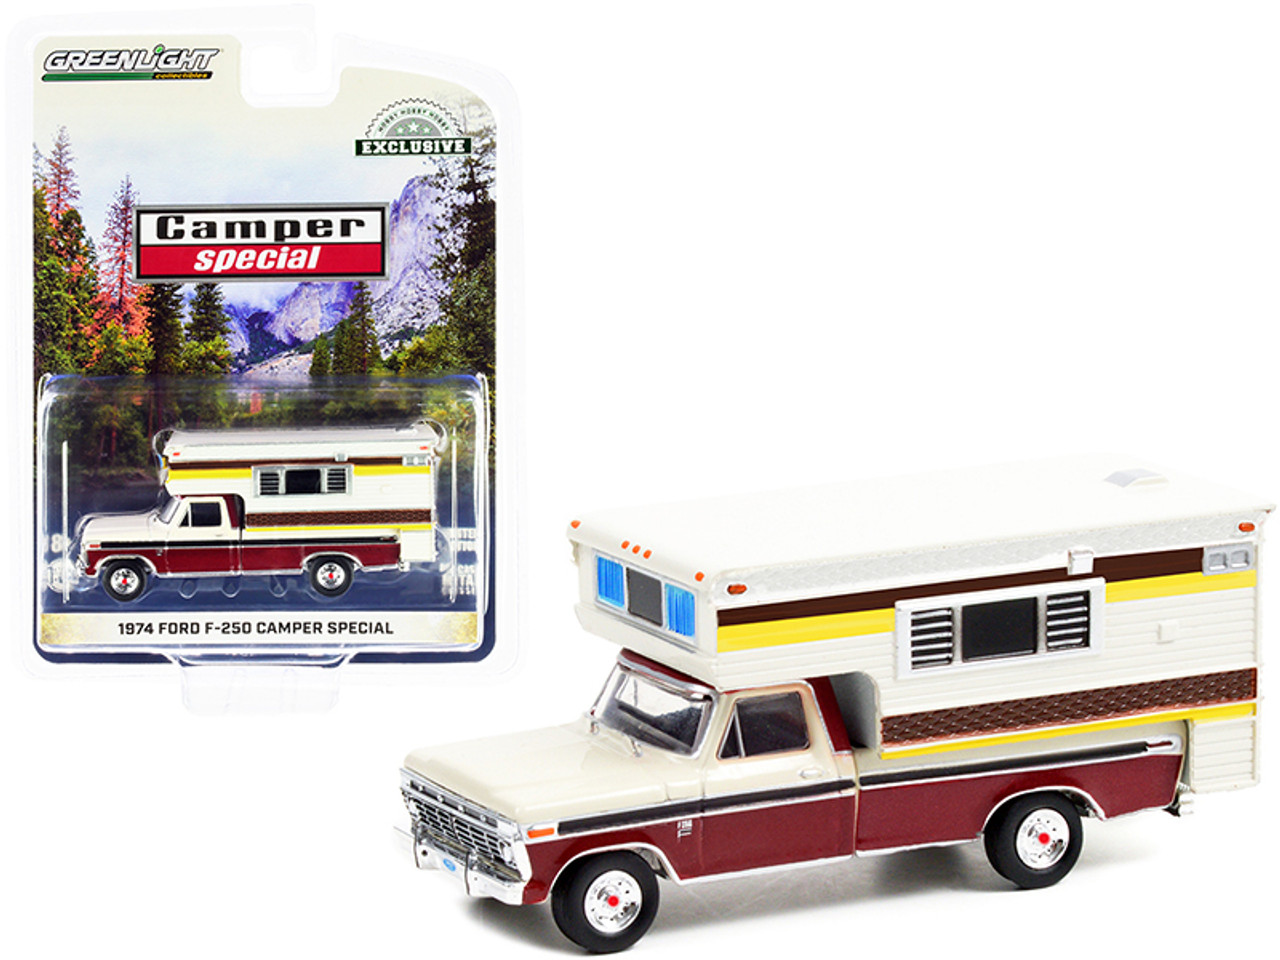 1974 Ford F-250 Pickup Truck with Large Camper Candy Apple Red and Wimbledon White "Camper Special" "Hobby Exclusive" 1/64 Diecast Model Car by Greenlight